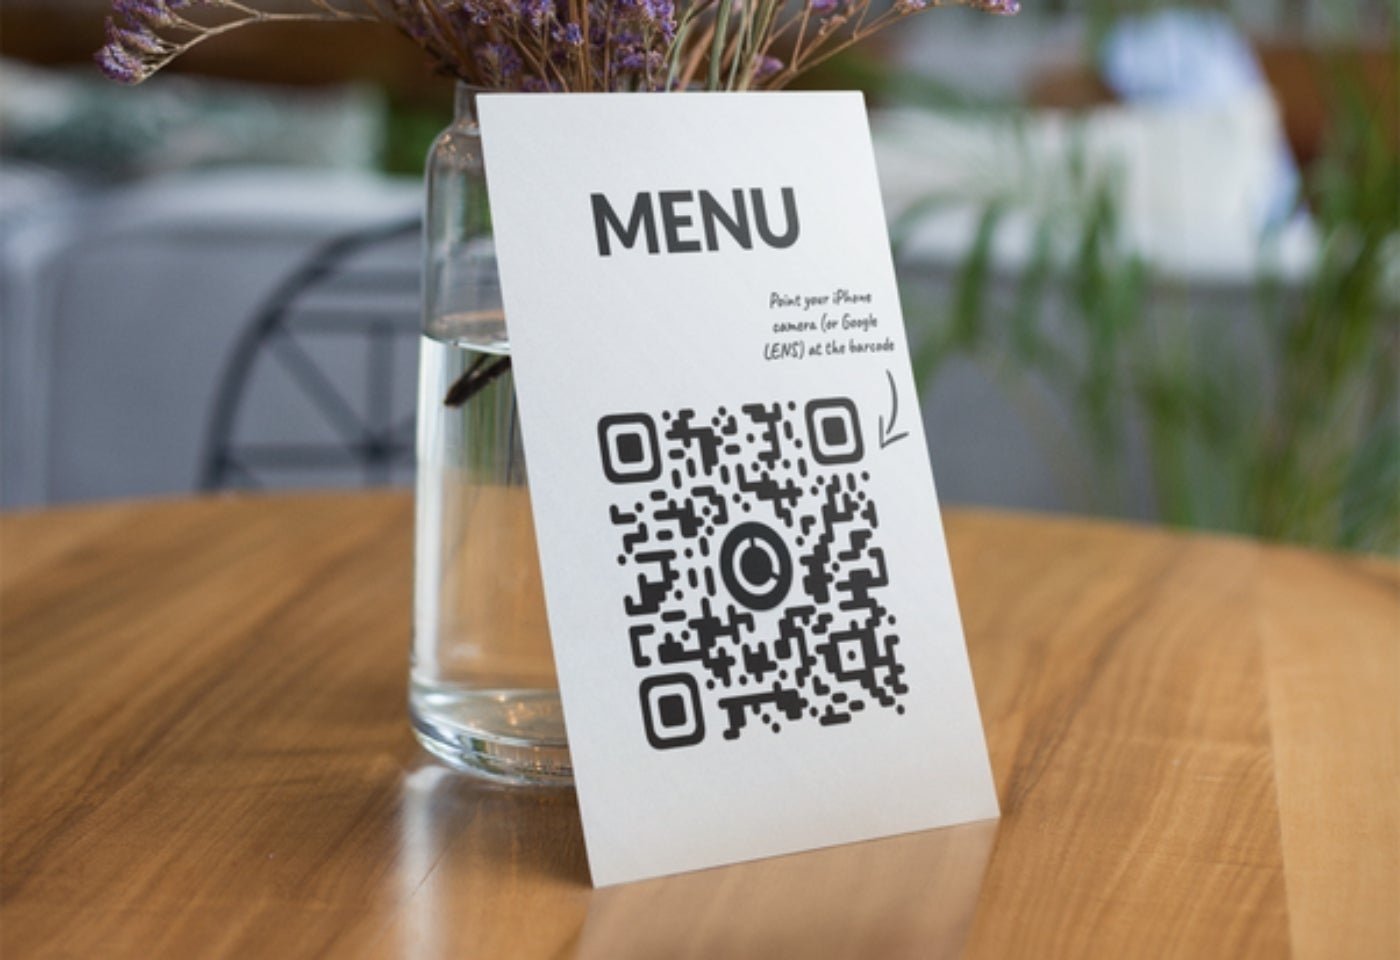 Read QR codes in bars